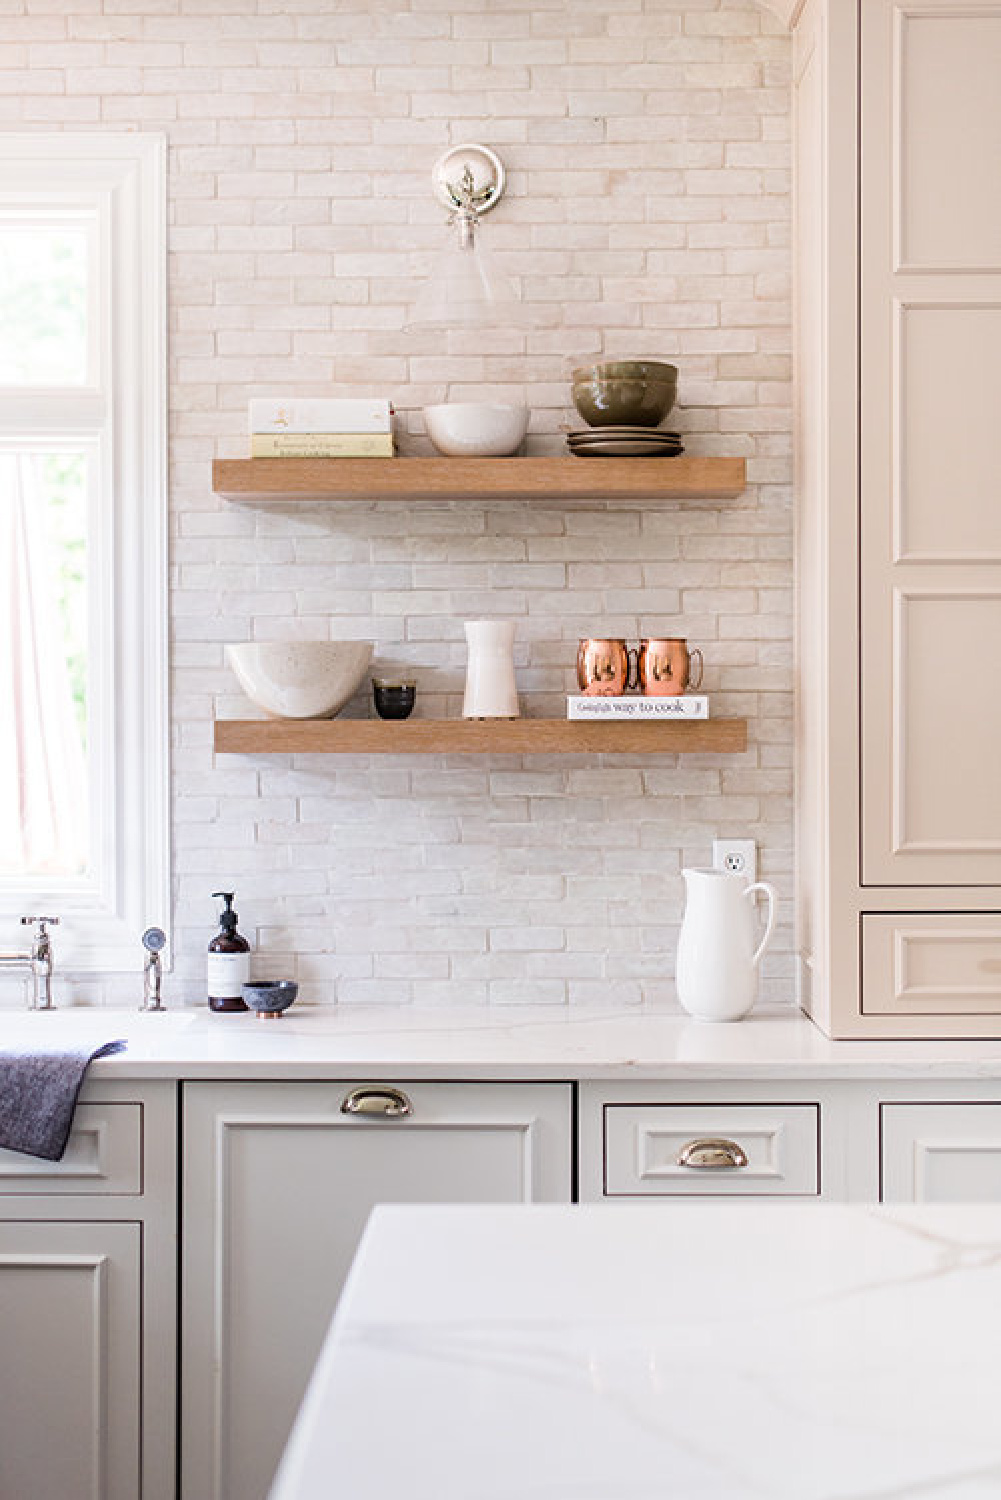 Two tone timeless white kitchen with floating shelves and design by Whittney Parkinson. #floatingshelves #whitekitchens